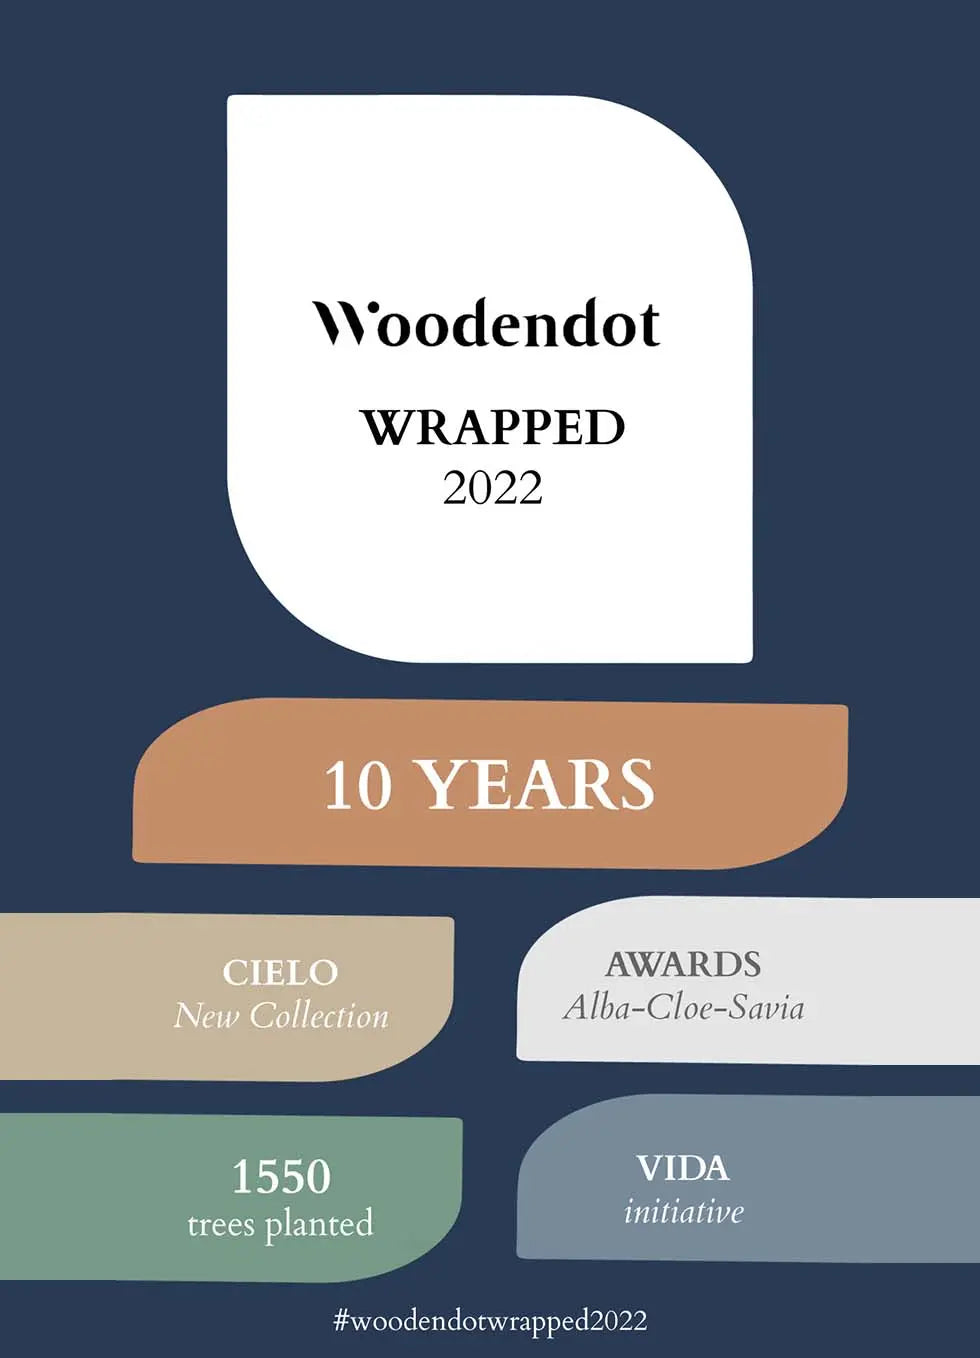 WOODENDOT WRAPPED 2022